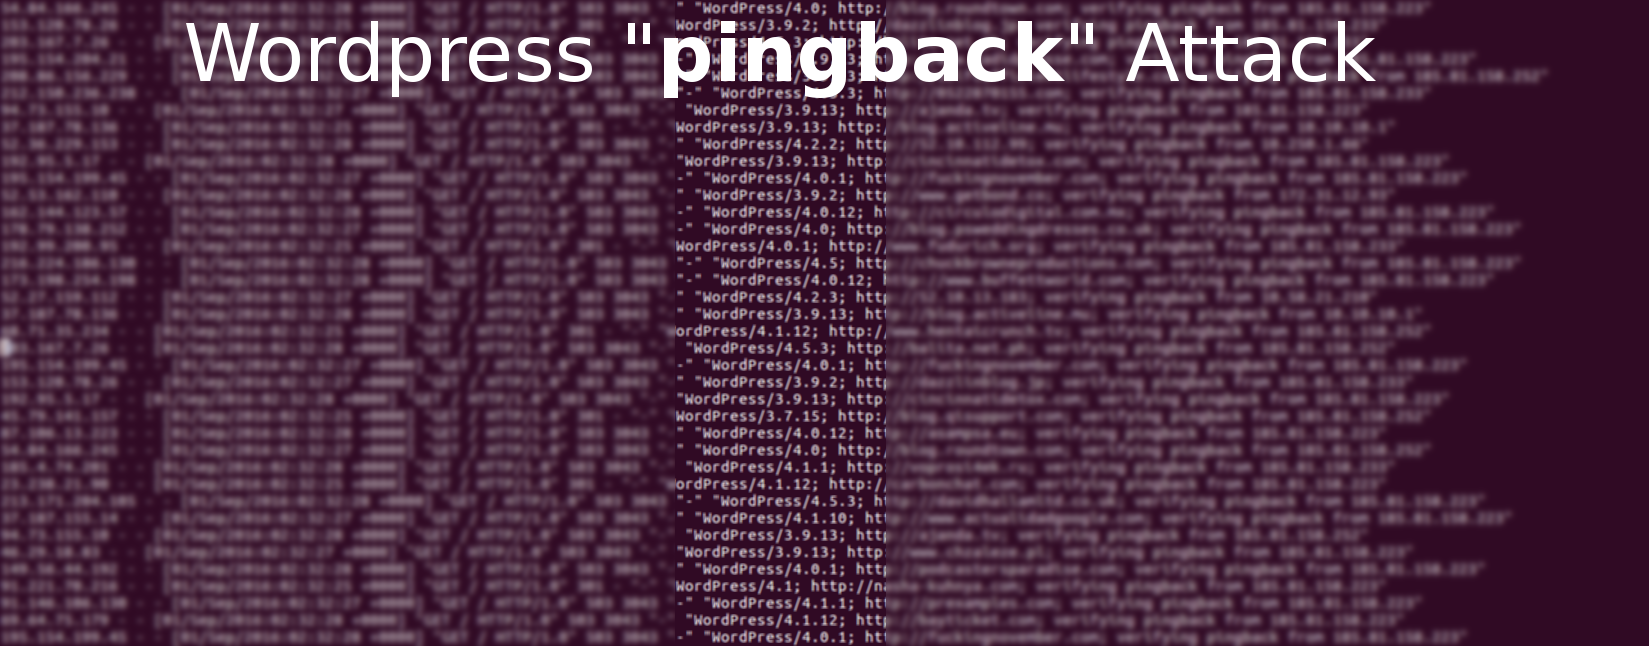 Surviving an amplified Wordpress pingback attack